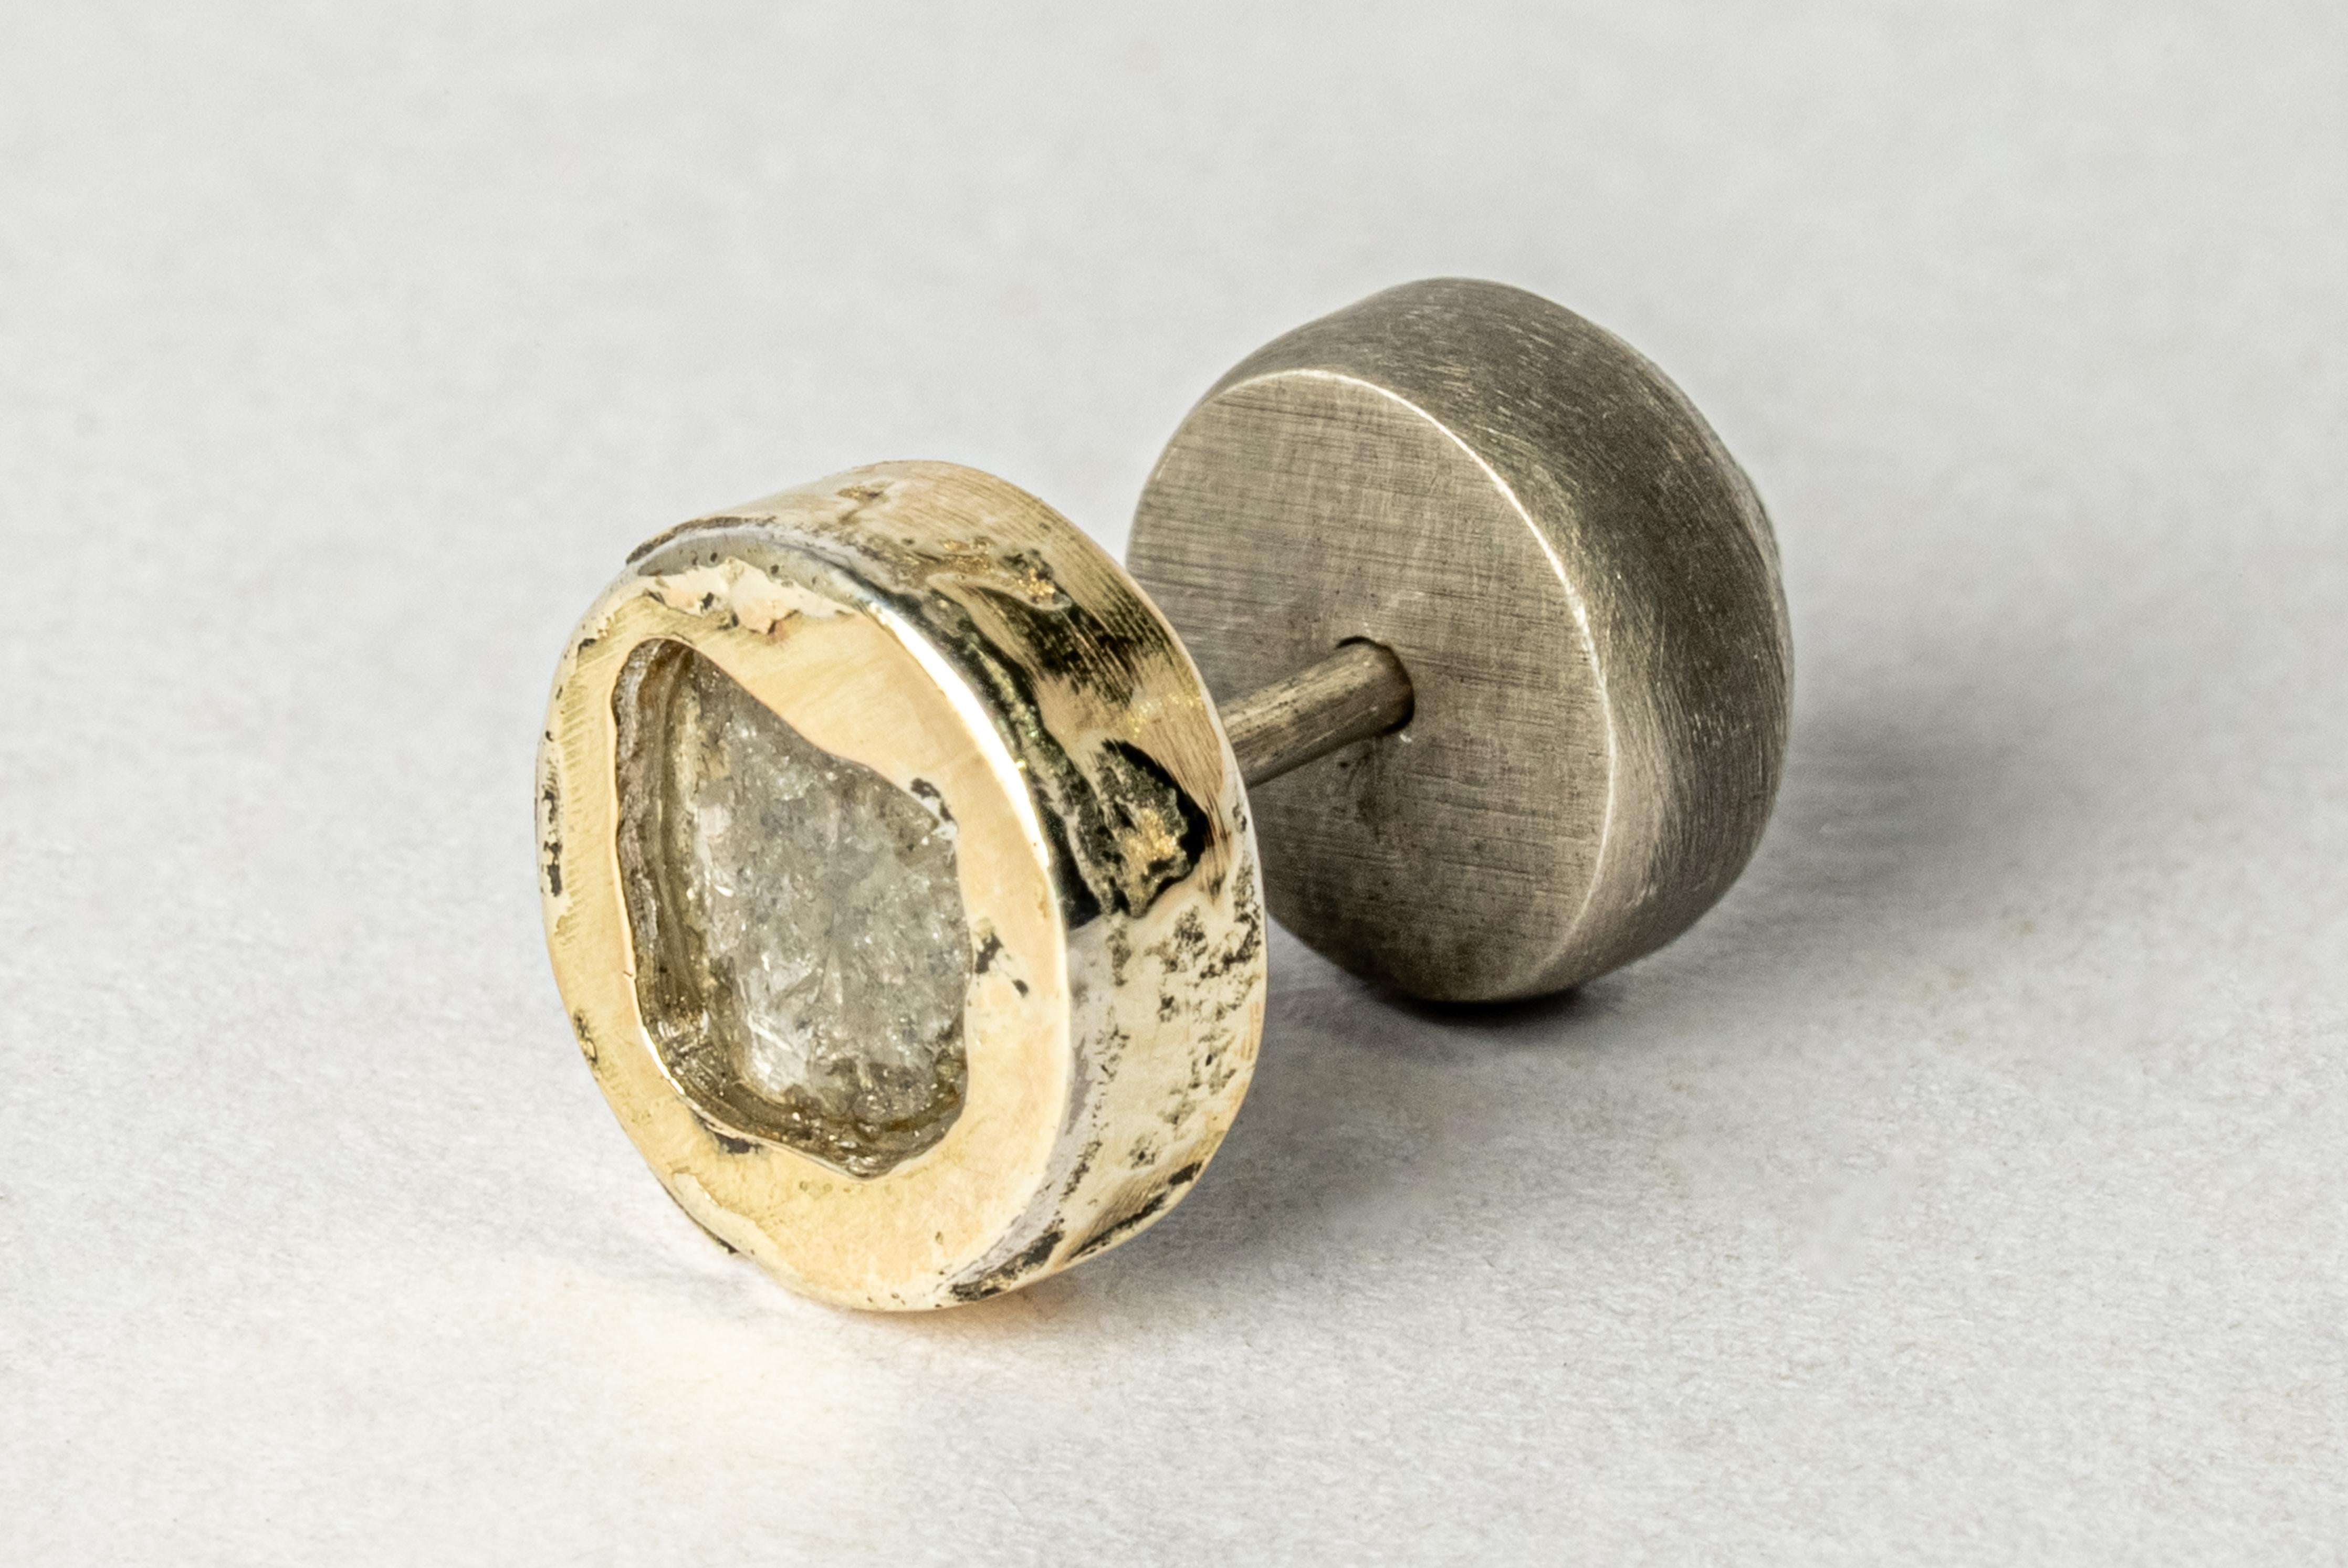 Stud earring in sterling silver, 18k solid yellow gold layer fused on the surface and slabs of rough diamond. These slabs are removed from a larger chunk of diamond. This item is made with a naturally occurring element and will vary from the